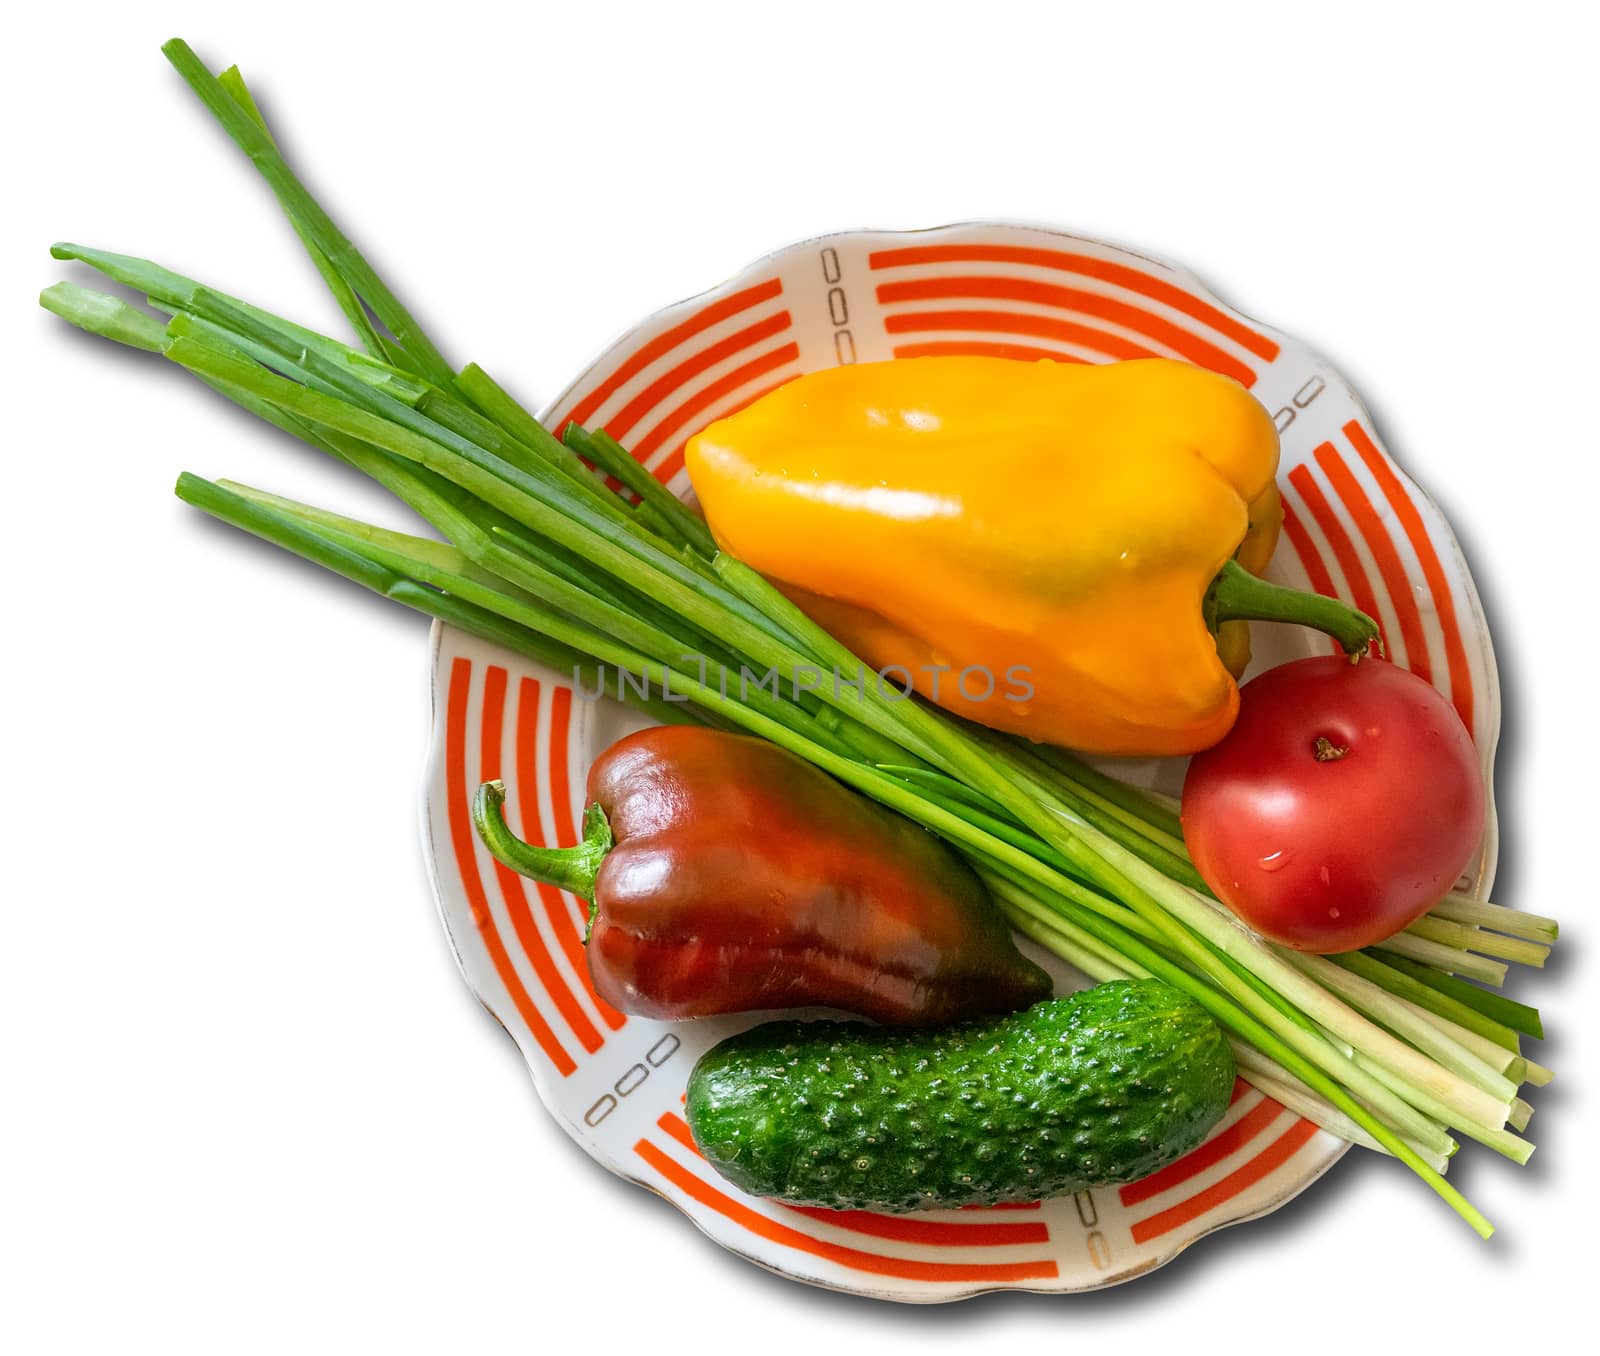 Vegetables on a plate